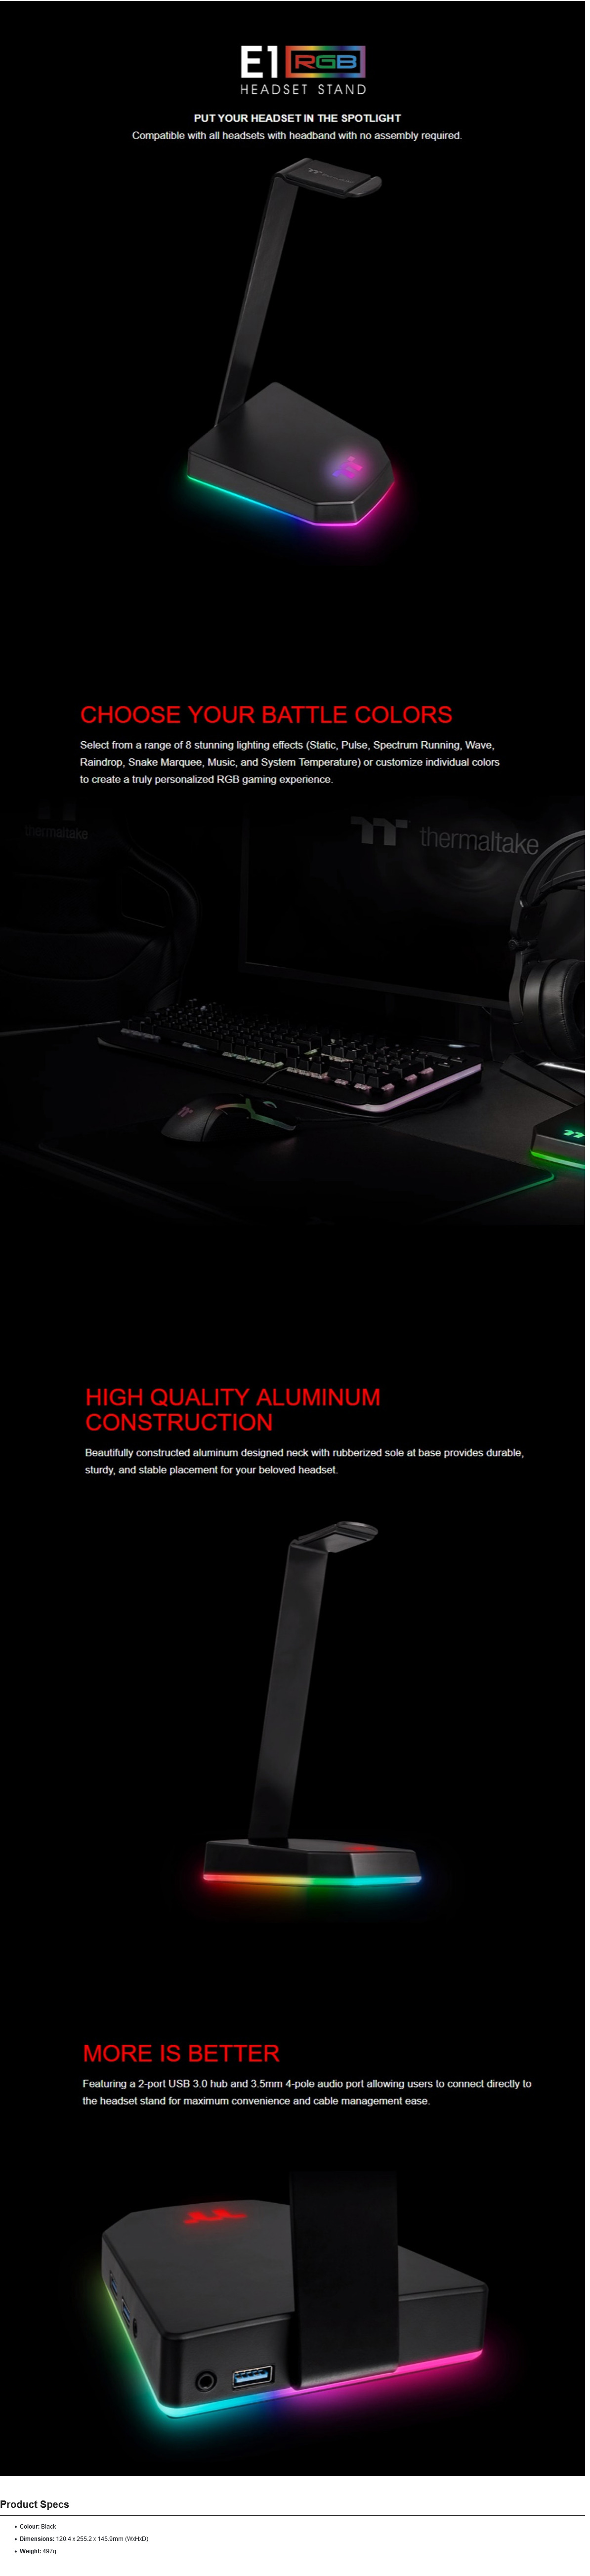 A large marketing image providing additional information about the product Thermaltake E1 RGB Gaming Headset Stand w/ 2x USB 3.0 - Additional alt info not provided